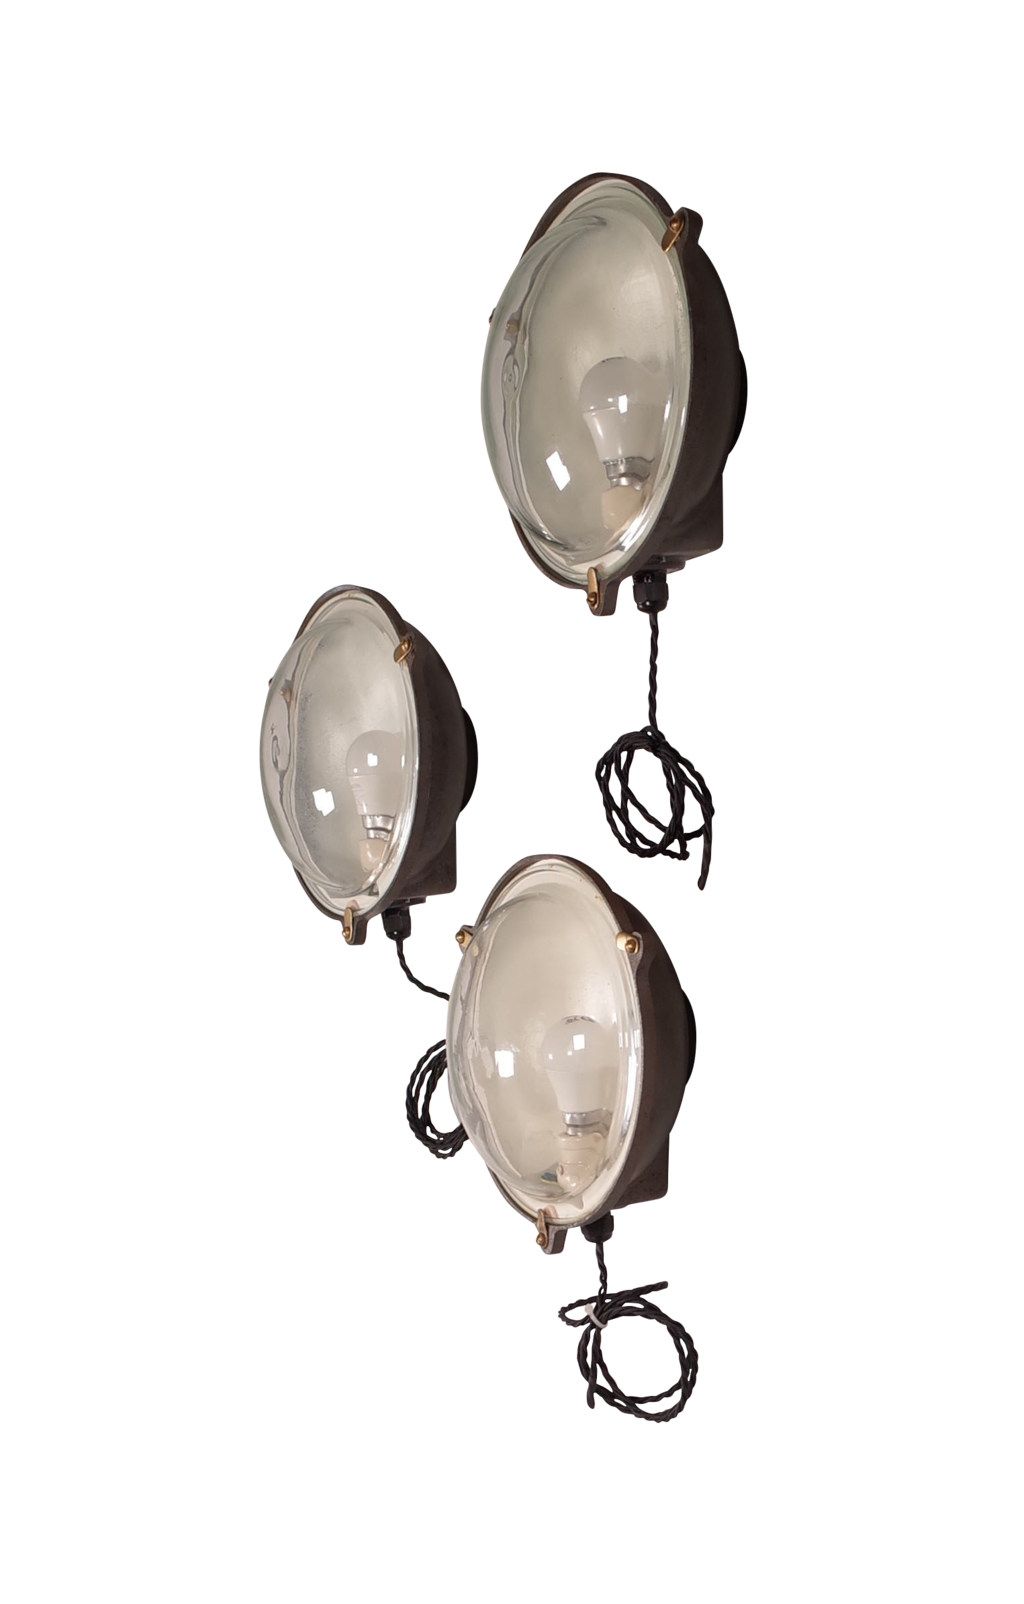 Steel and Glass Bulkhead Lights by the General Electric Company